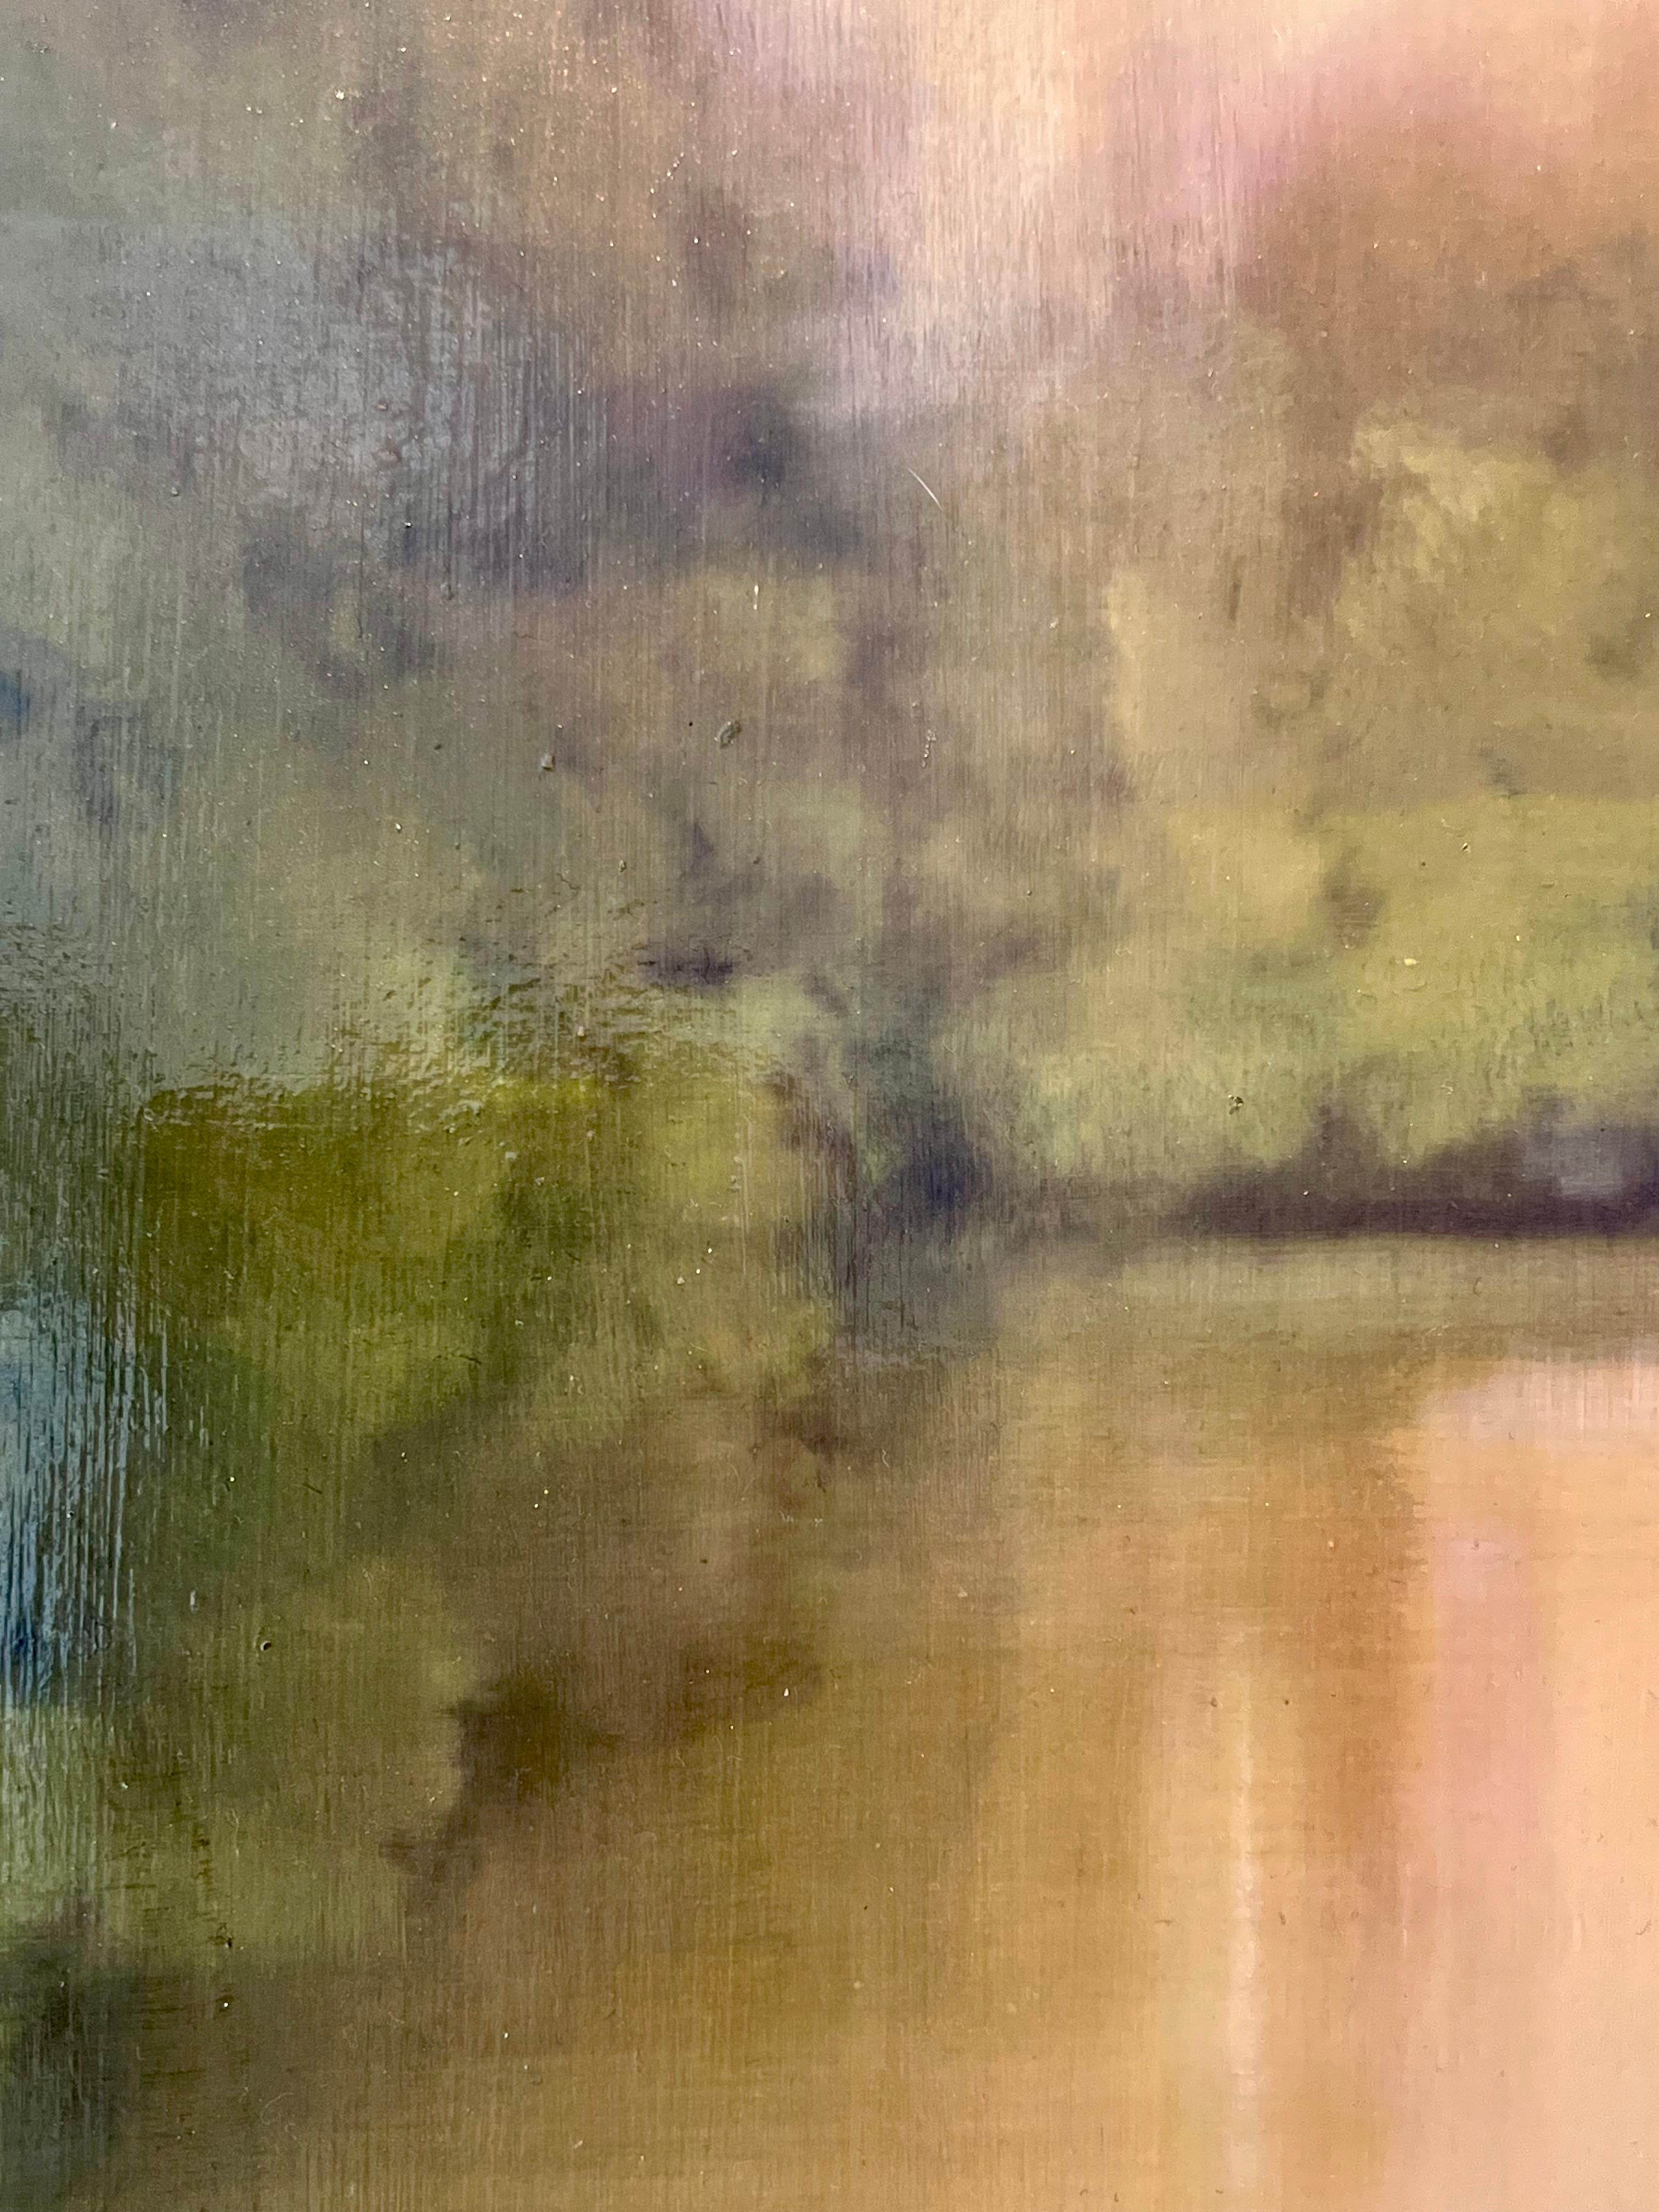 Golden Pond-original abstract landscape-waterscape oil painting-contemporary Art - Abstract Expressionist Painting by Louse Fairchild